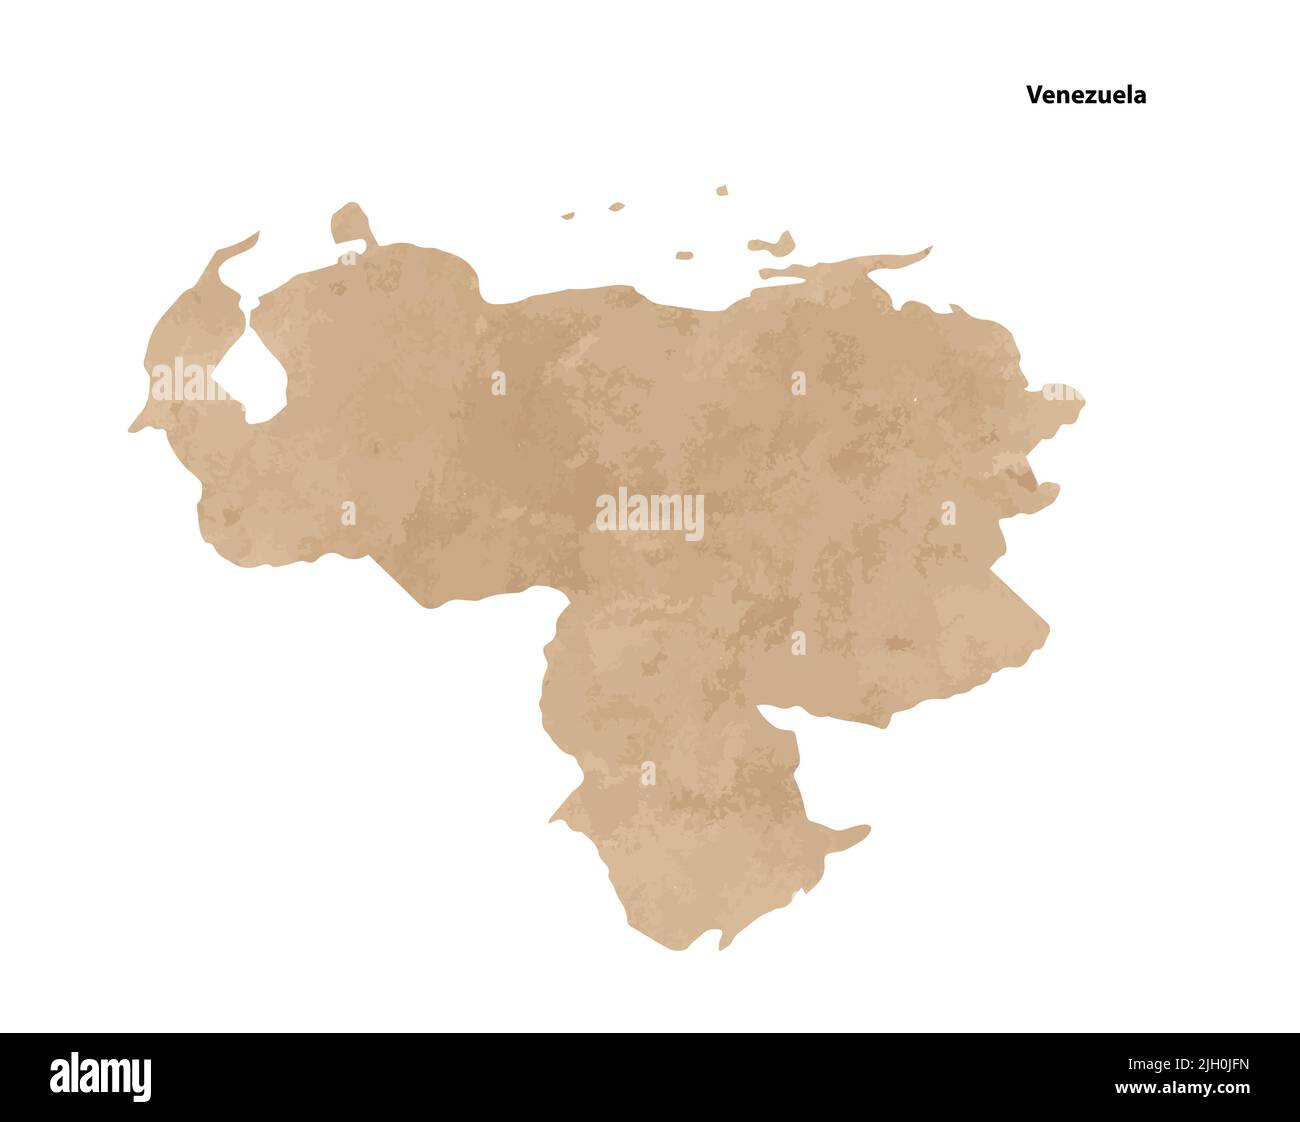 Old vintage paper textured map of Venezuela Country - Vector illustration Stock Vector